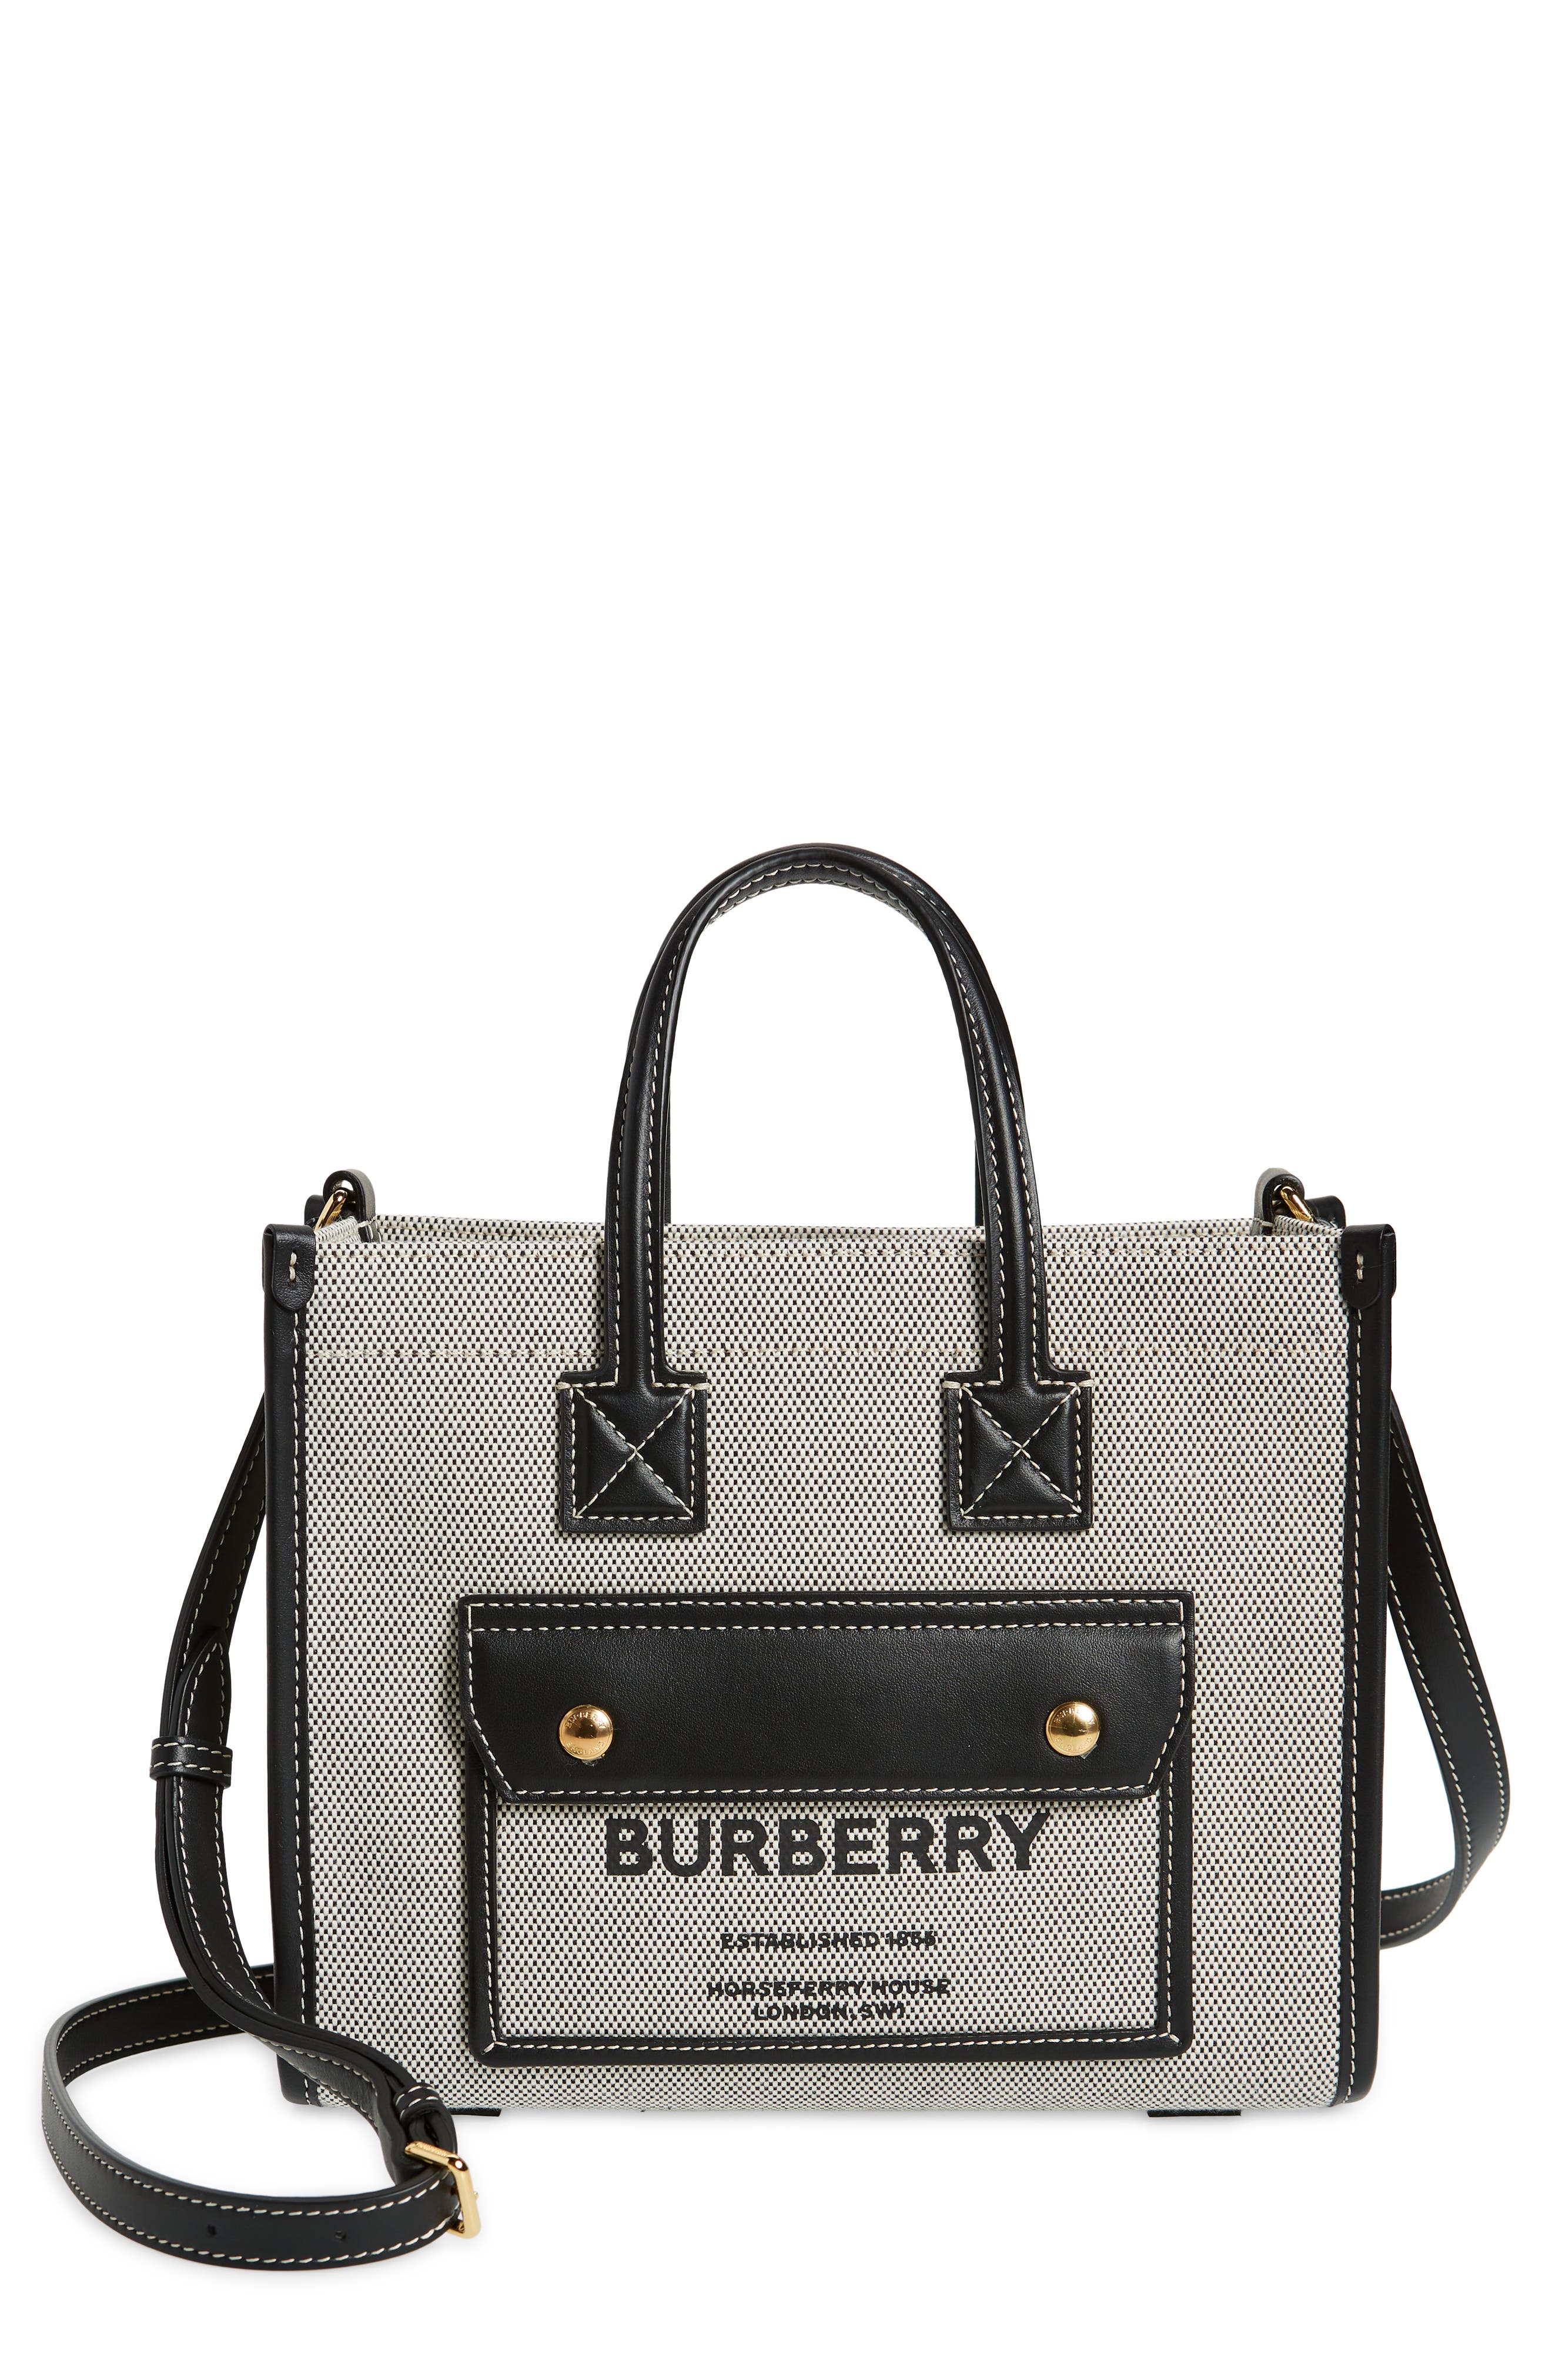 Burberry Mini Freya Horseferry Logo Canvas Tote in Black/Black at Nordstrom